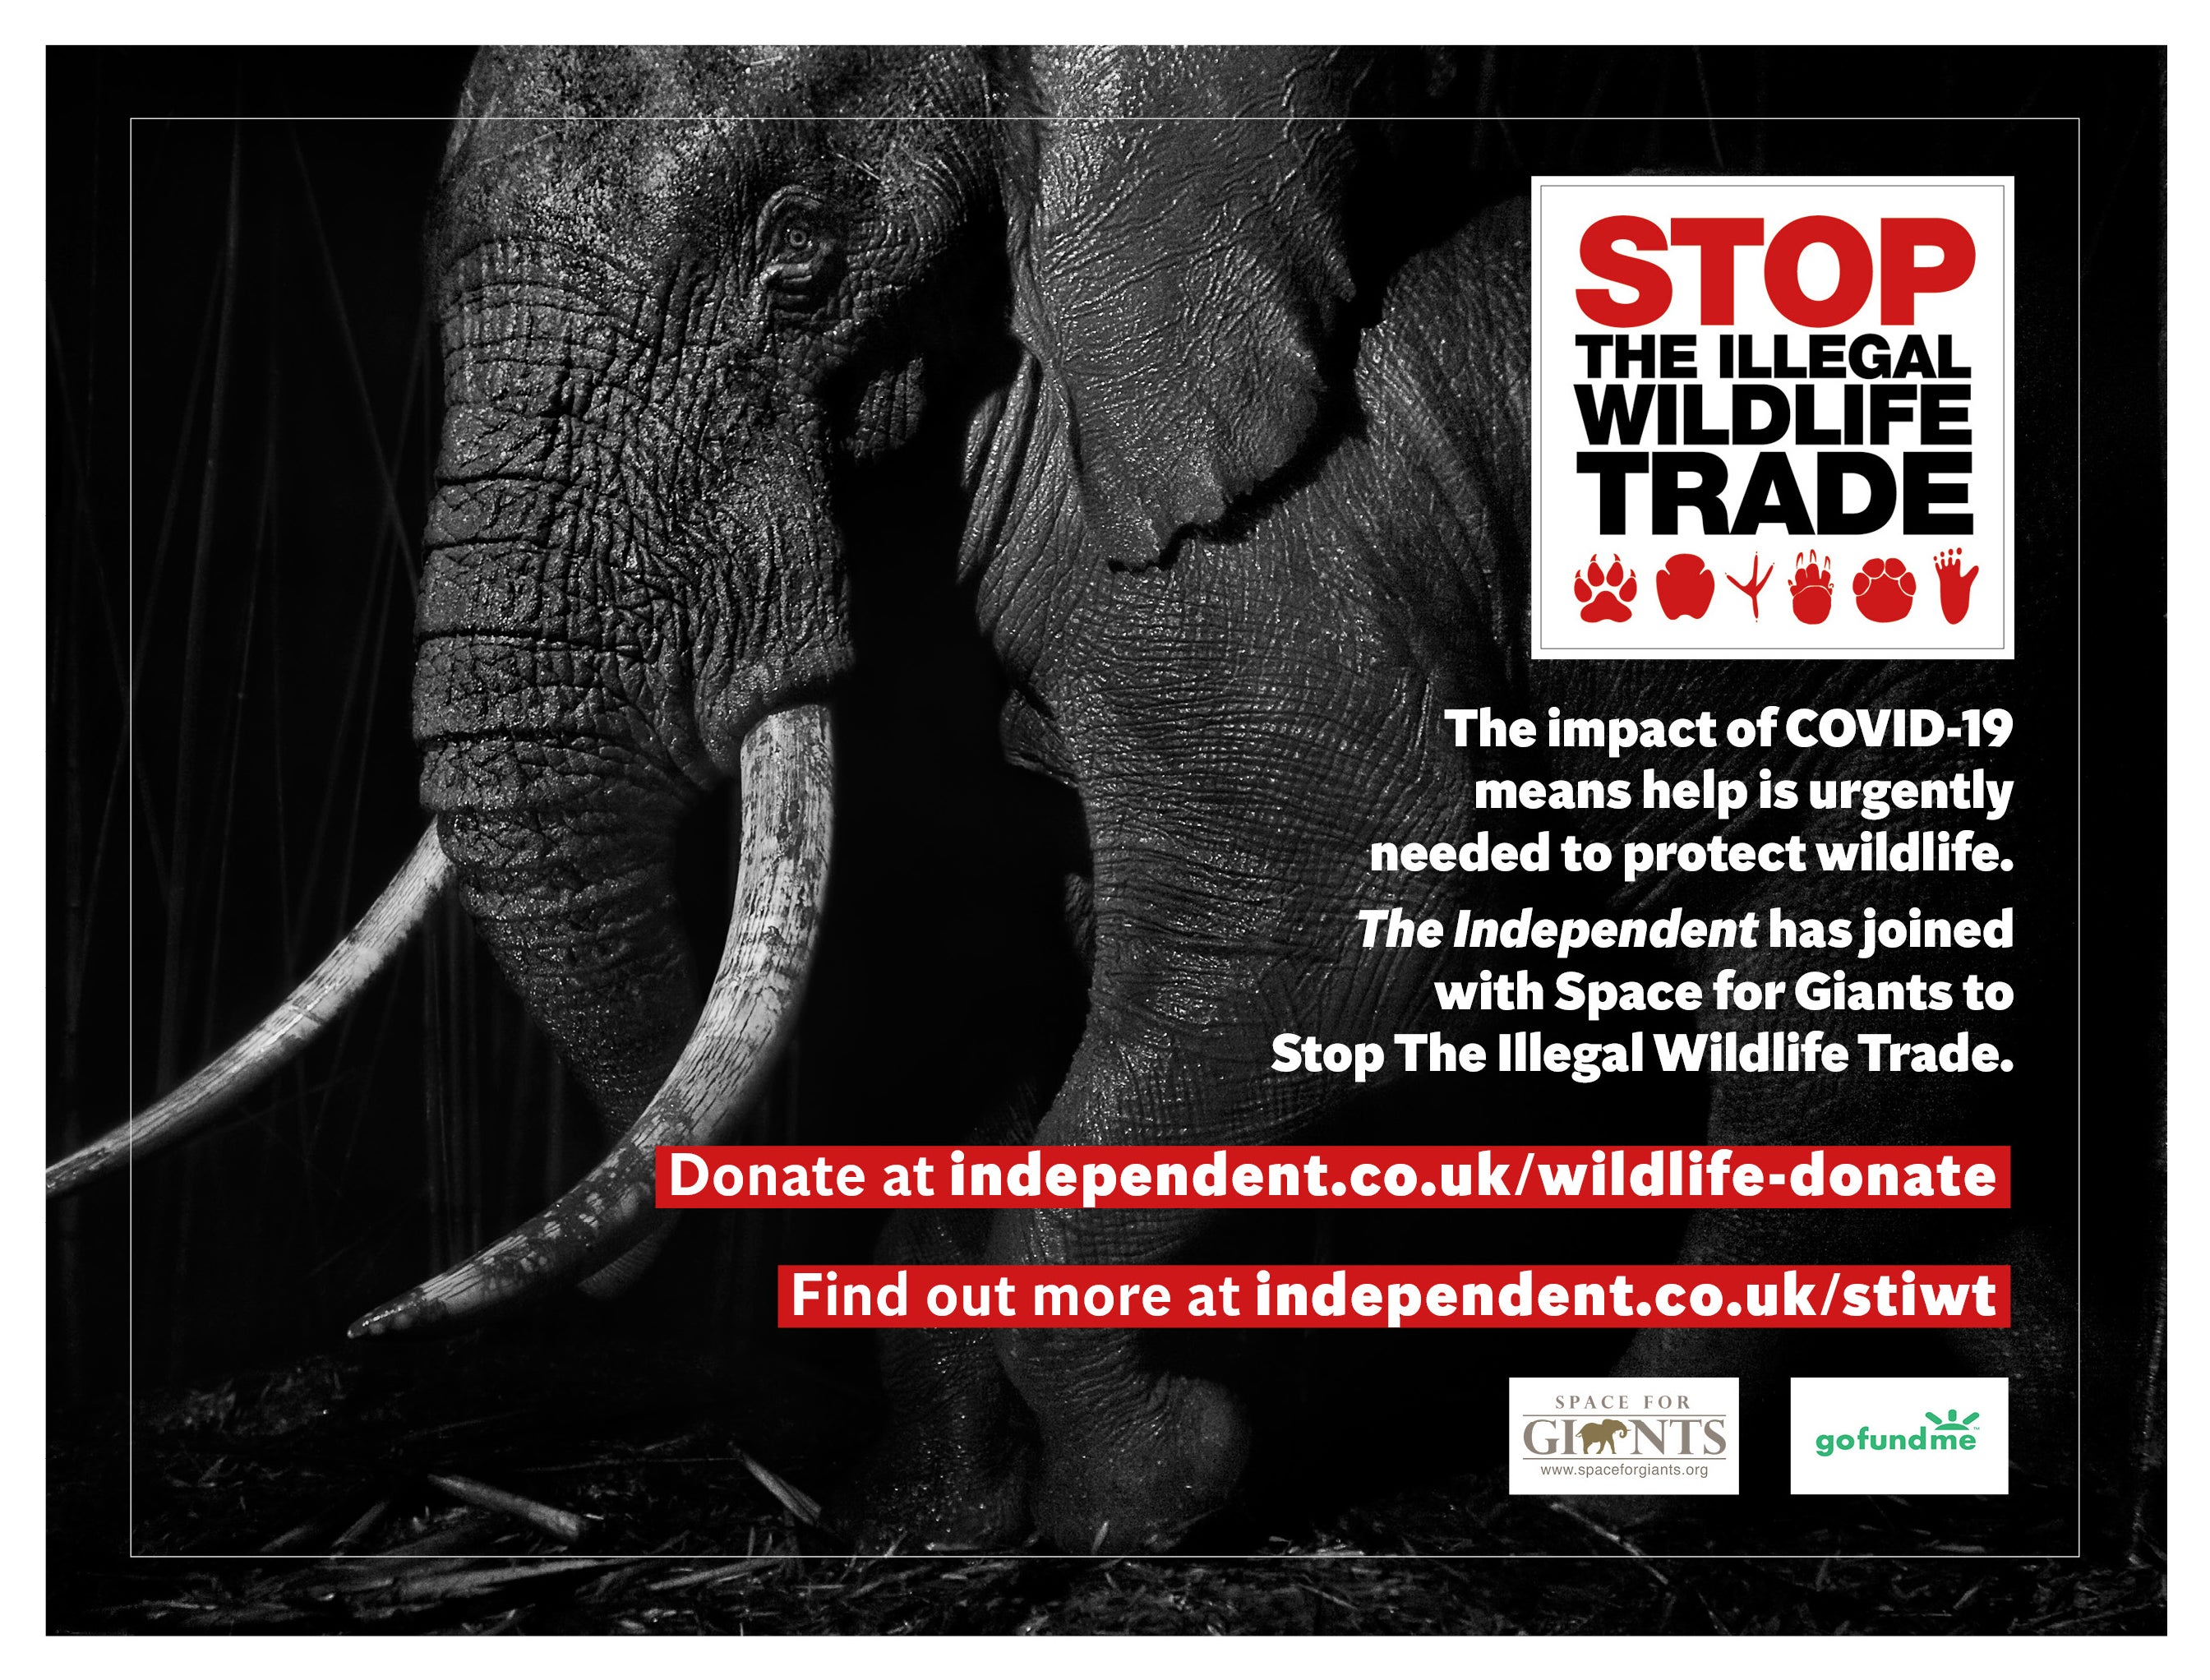 We are working with conservation charity Space for Giants to protect wildlife at risk from poachers due to the conservation funding crisis caused by Covid-19. Help is desperately needed to support wildlife rangers, local communities and law enforcement personnel to prevent wildlife crime. Donate HERE